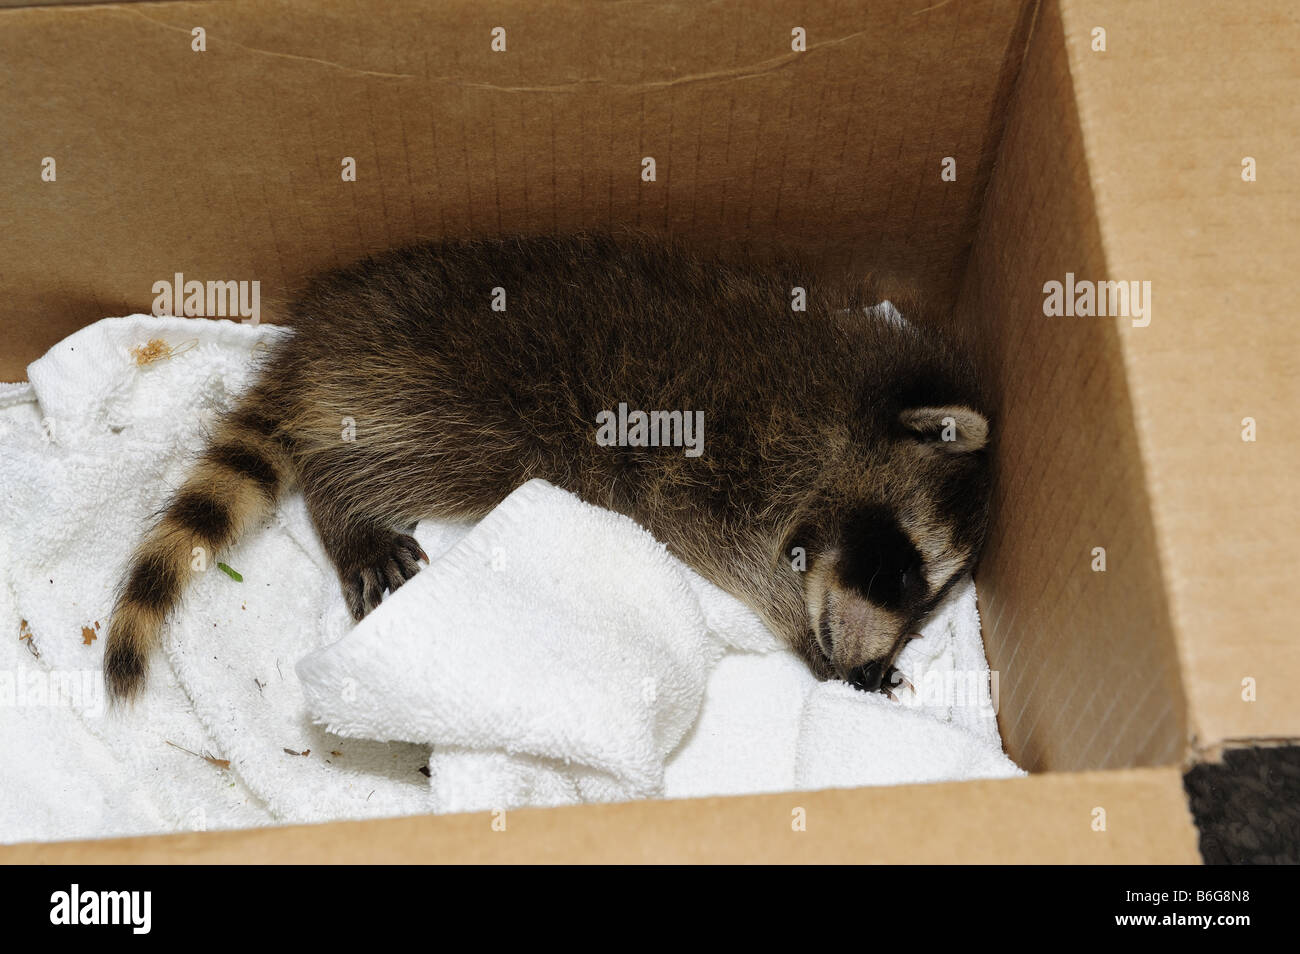 Rescued baby raccoon sleeping in a box Stock Photo